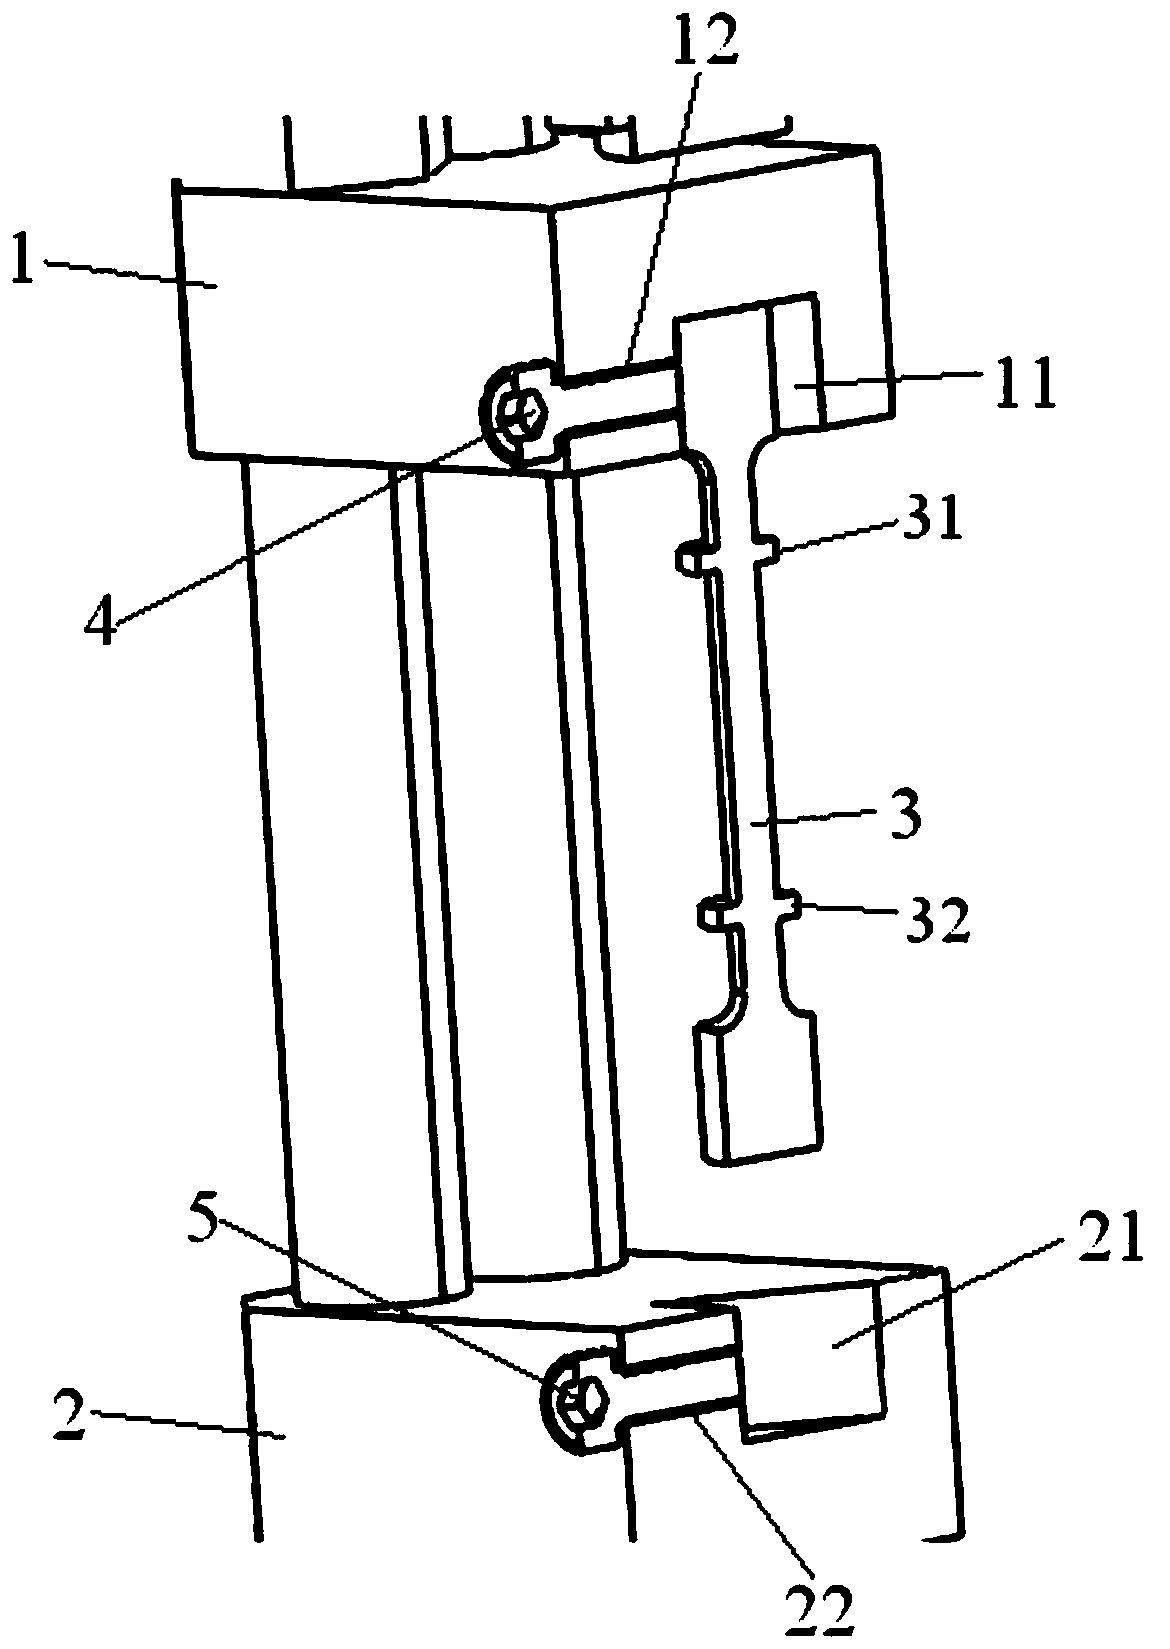 Compressive yield strength test method for material